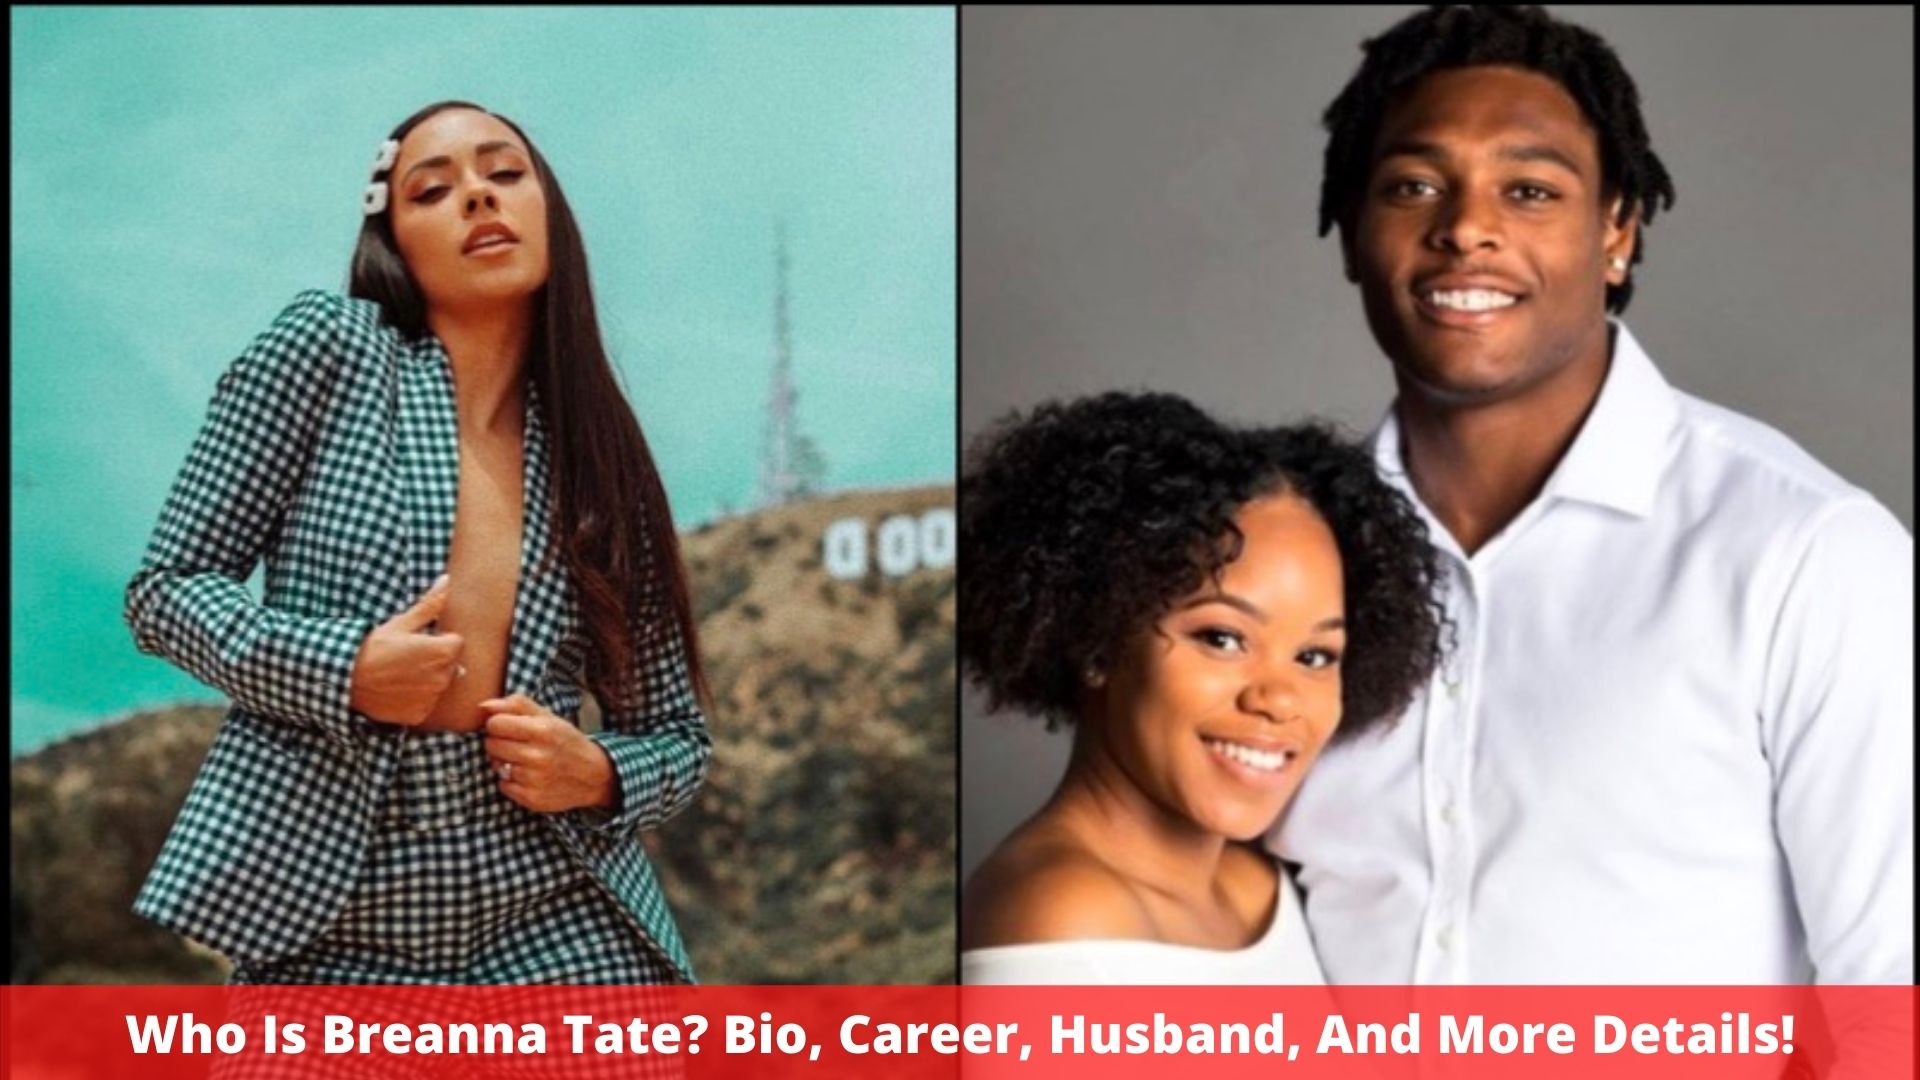 Who Is Breanna Tate? Bio, Career, Husband, And More Details!